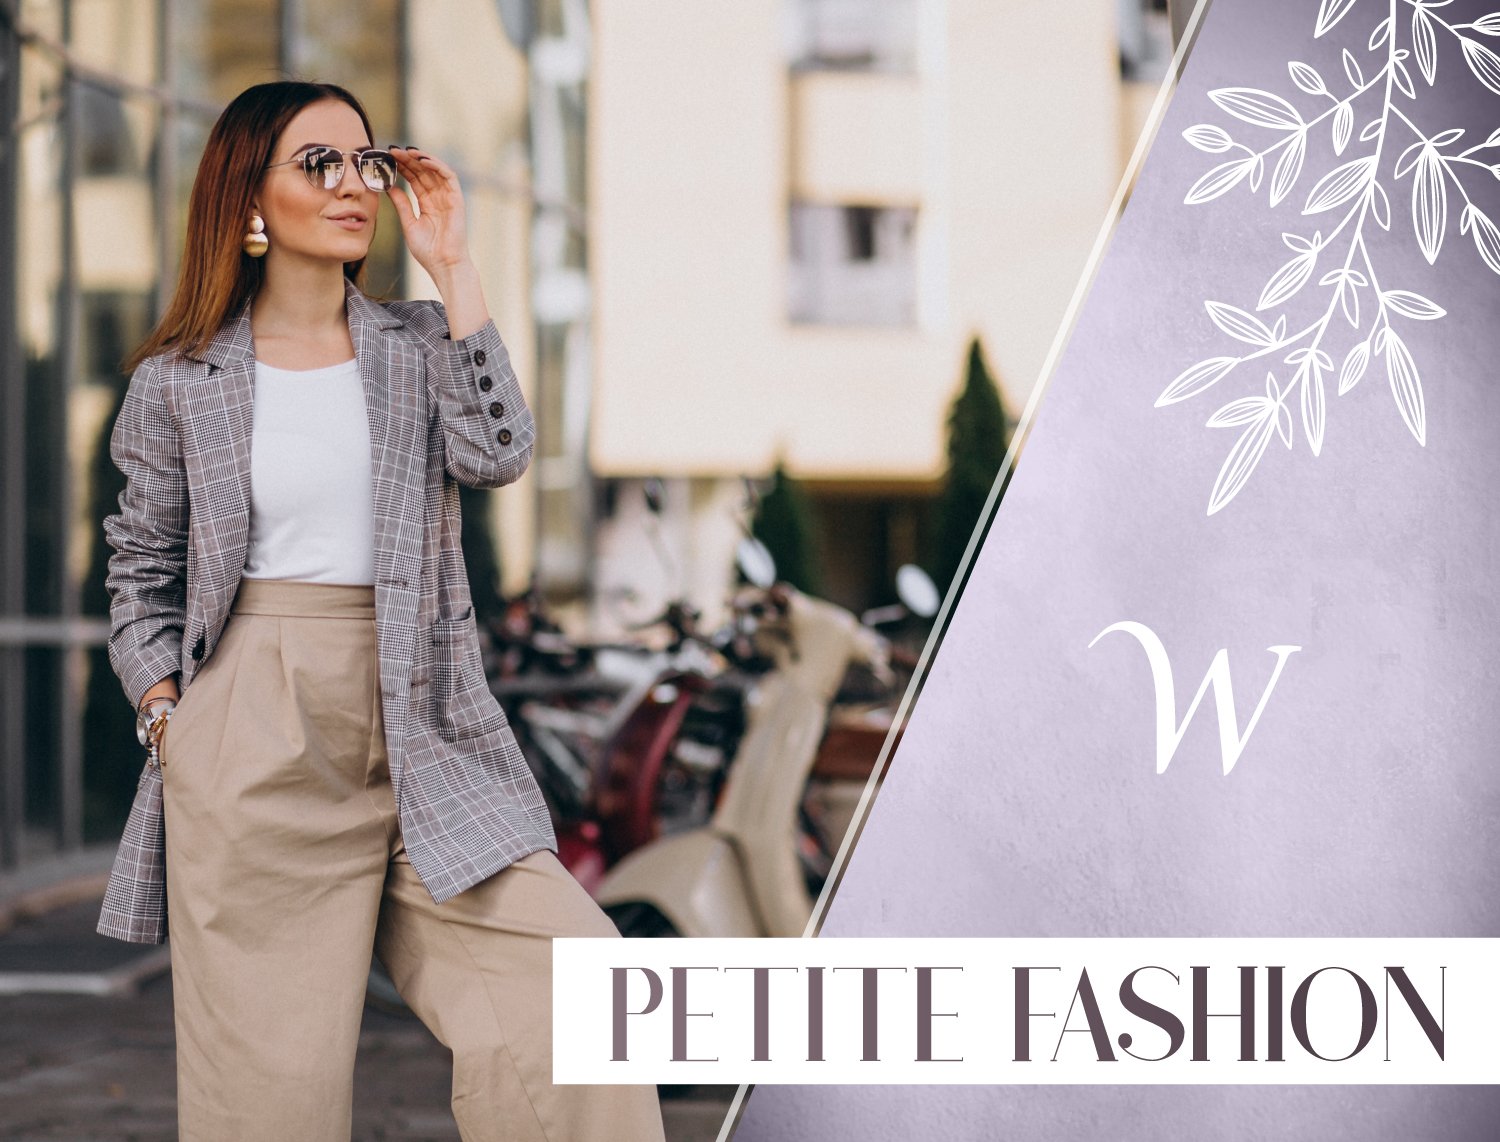 Dresses For Petite Women – Great Outfit Ideas